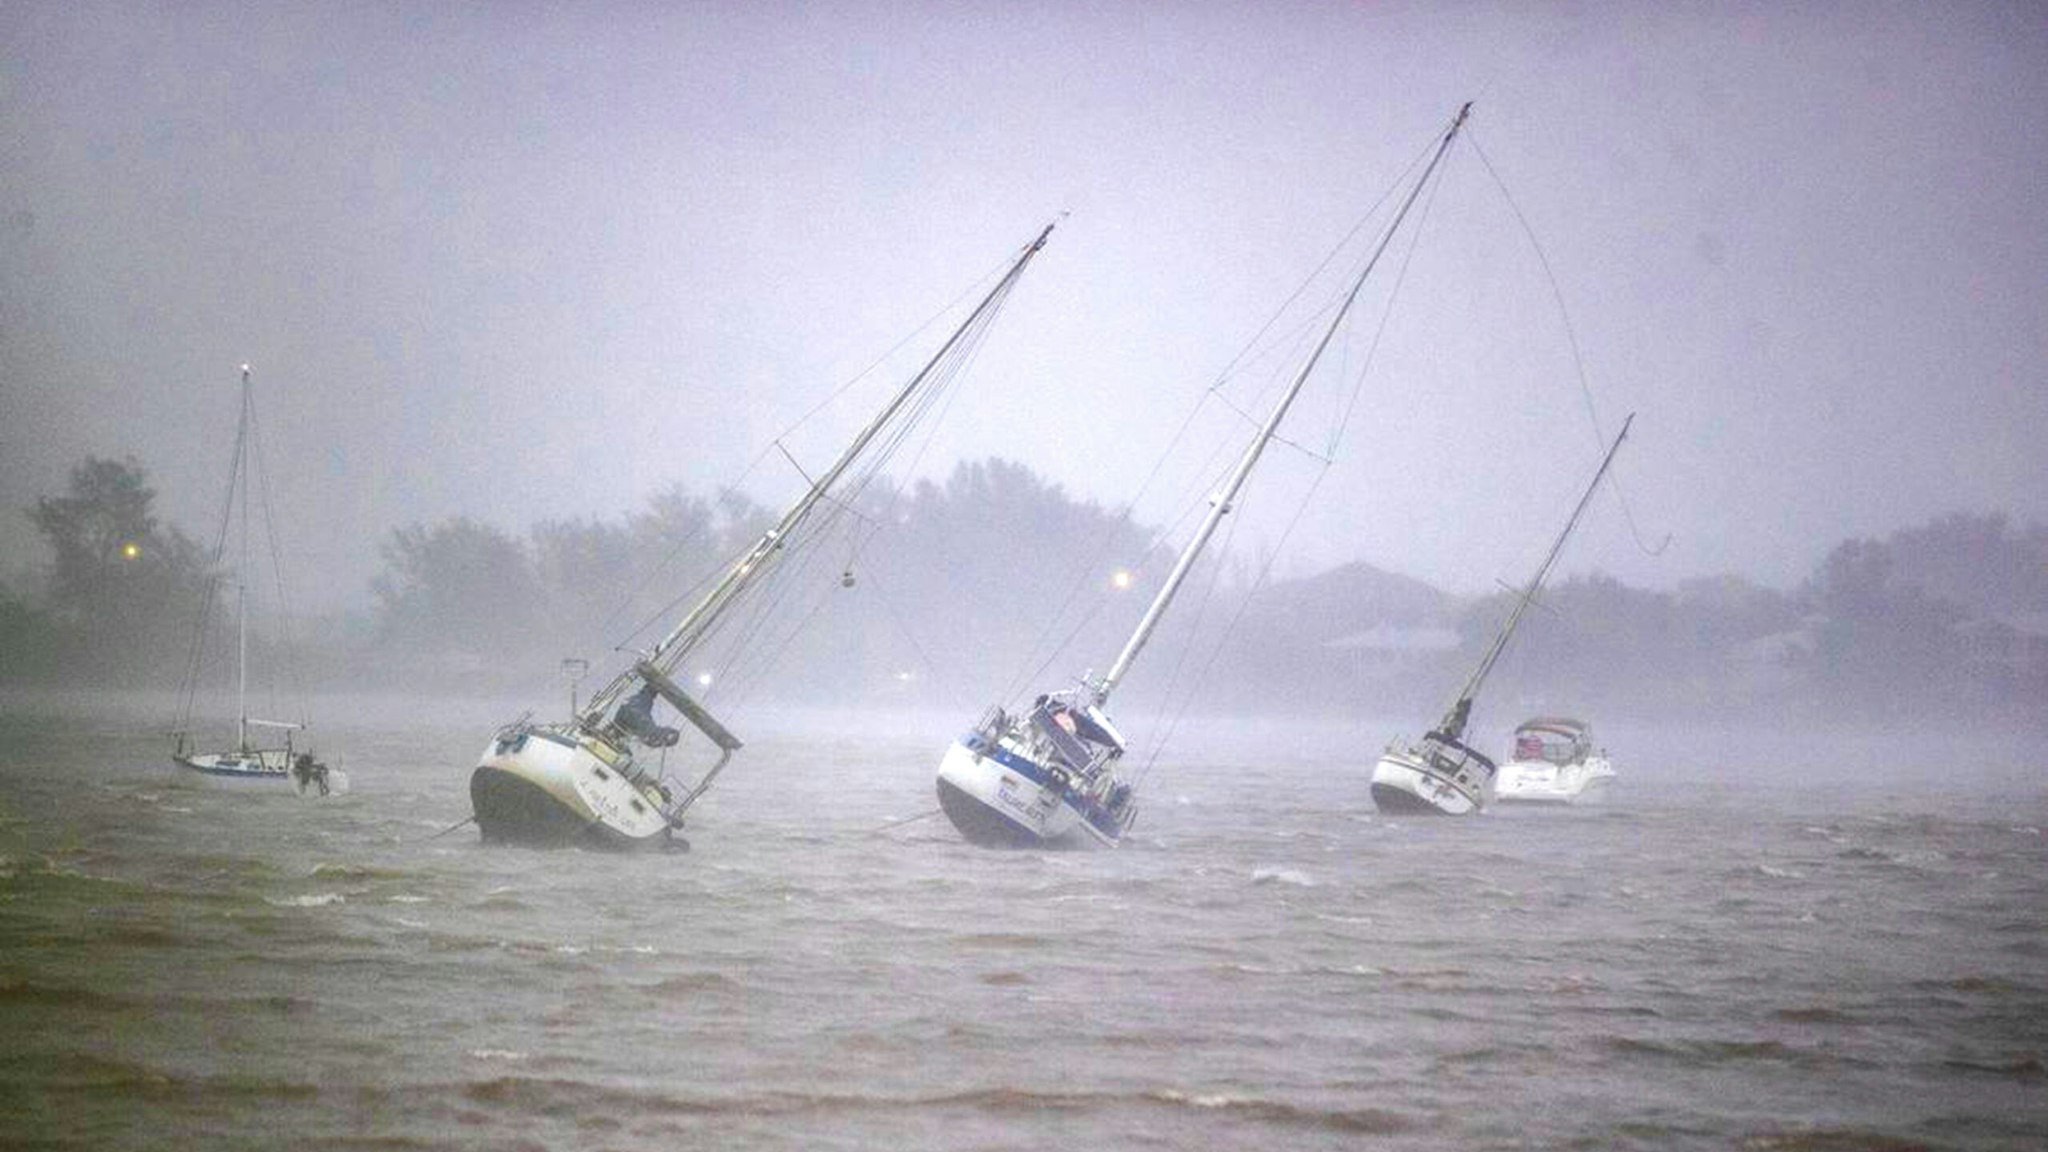 Sail boats anchored in Roberts Bay are blown around by 50 mph winds in Venice, Florida, as Hurricane Ian, a possible Category 5 Hurricane, approaches the West Coast of Florida, on Wednesday, Sept. 28, 2022.